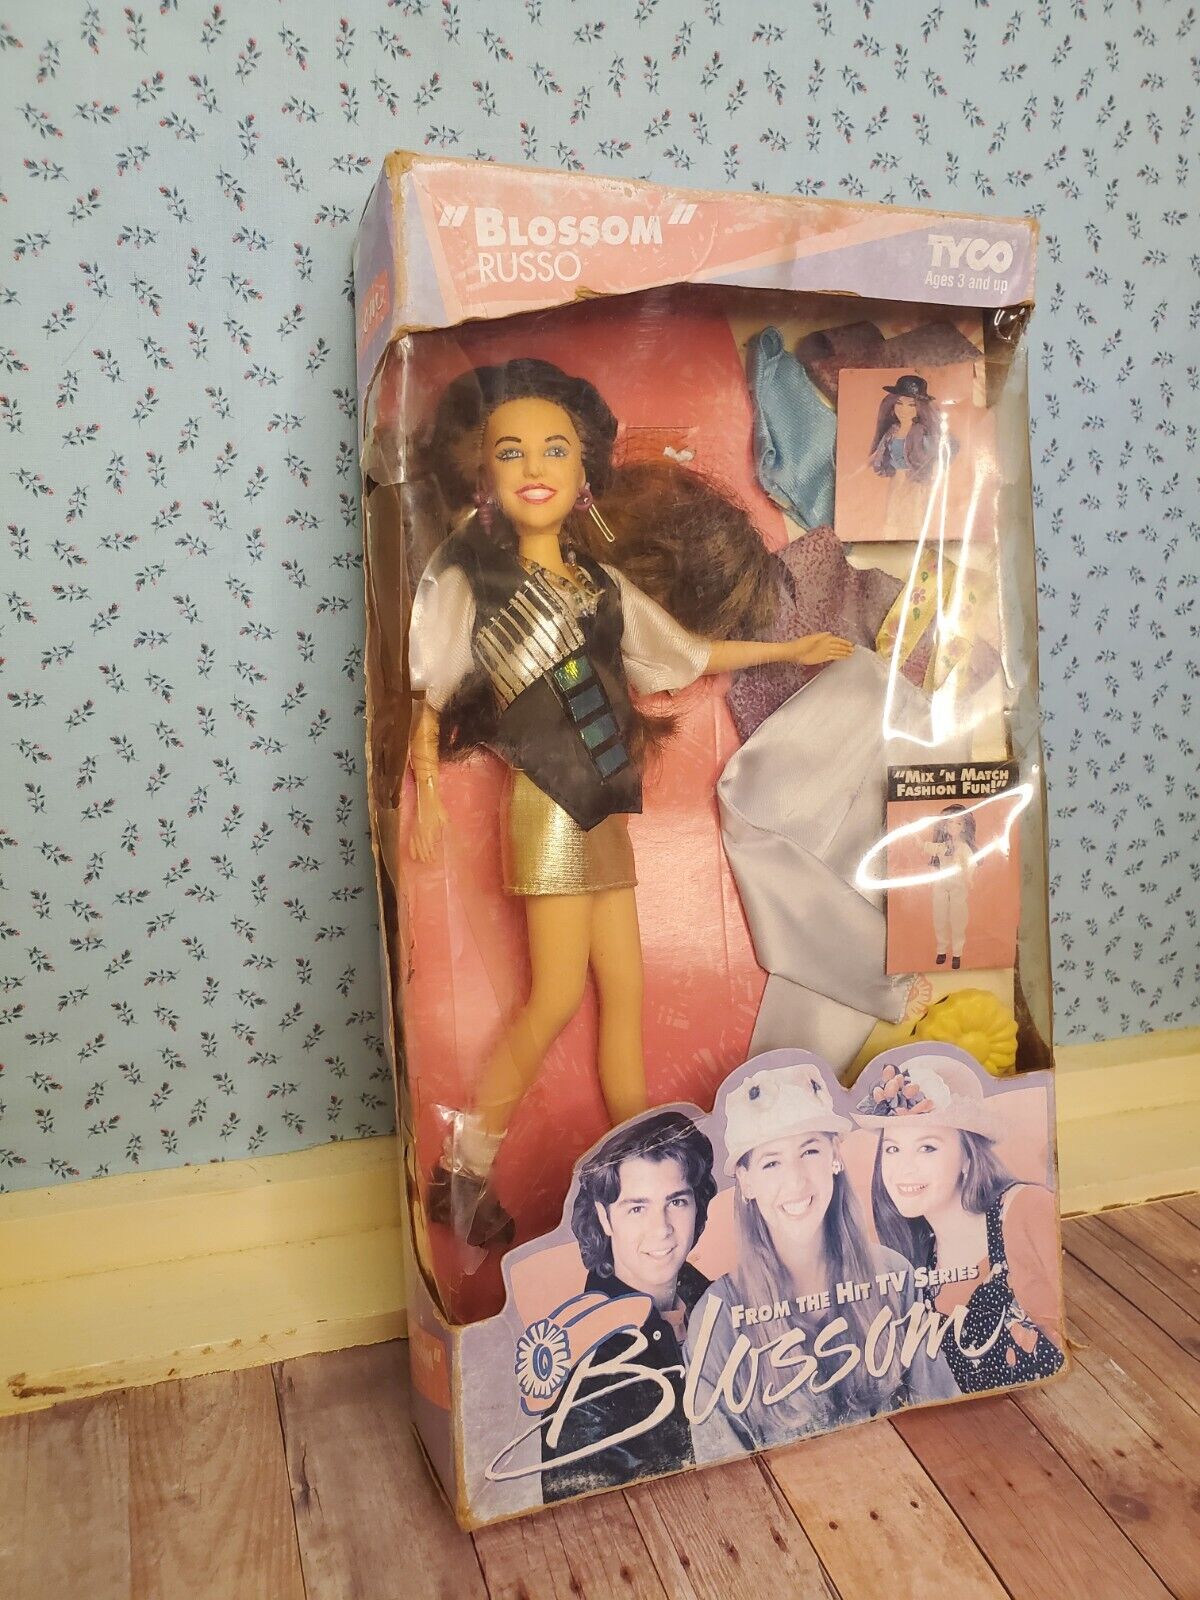 Tyco 1993 Blossom Russo Doll In Box From Tv Show Blossom 9.5” Mayim Bialik